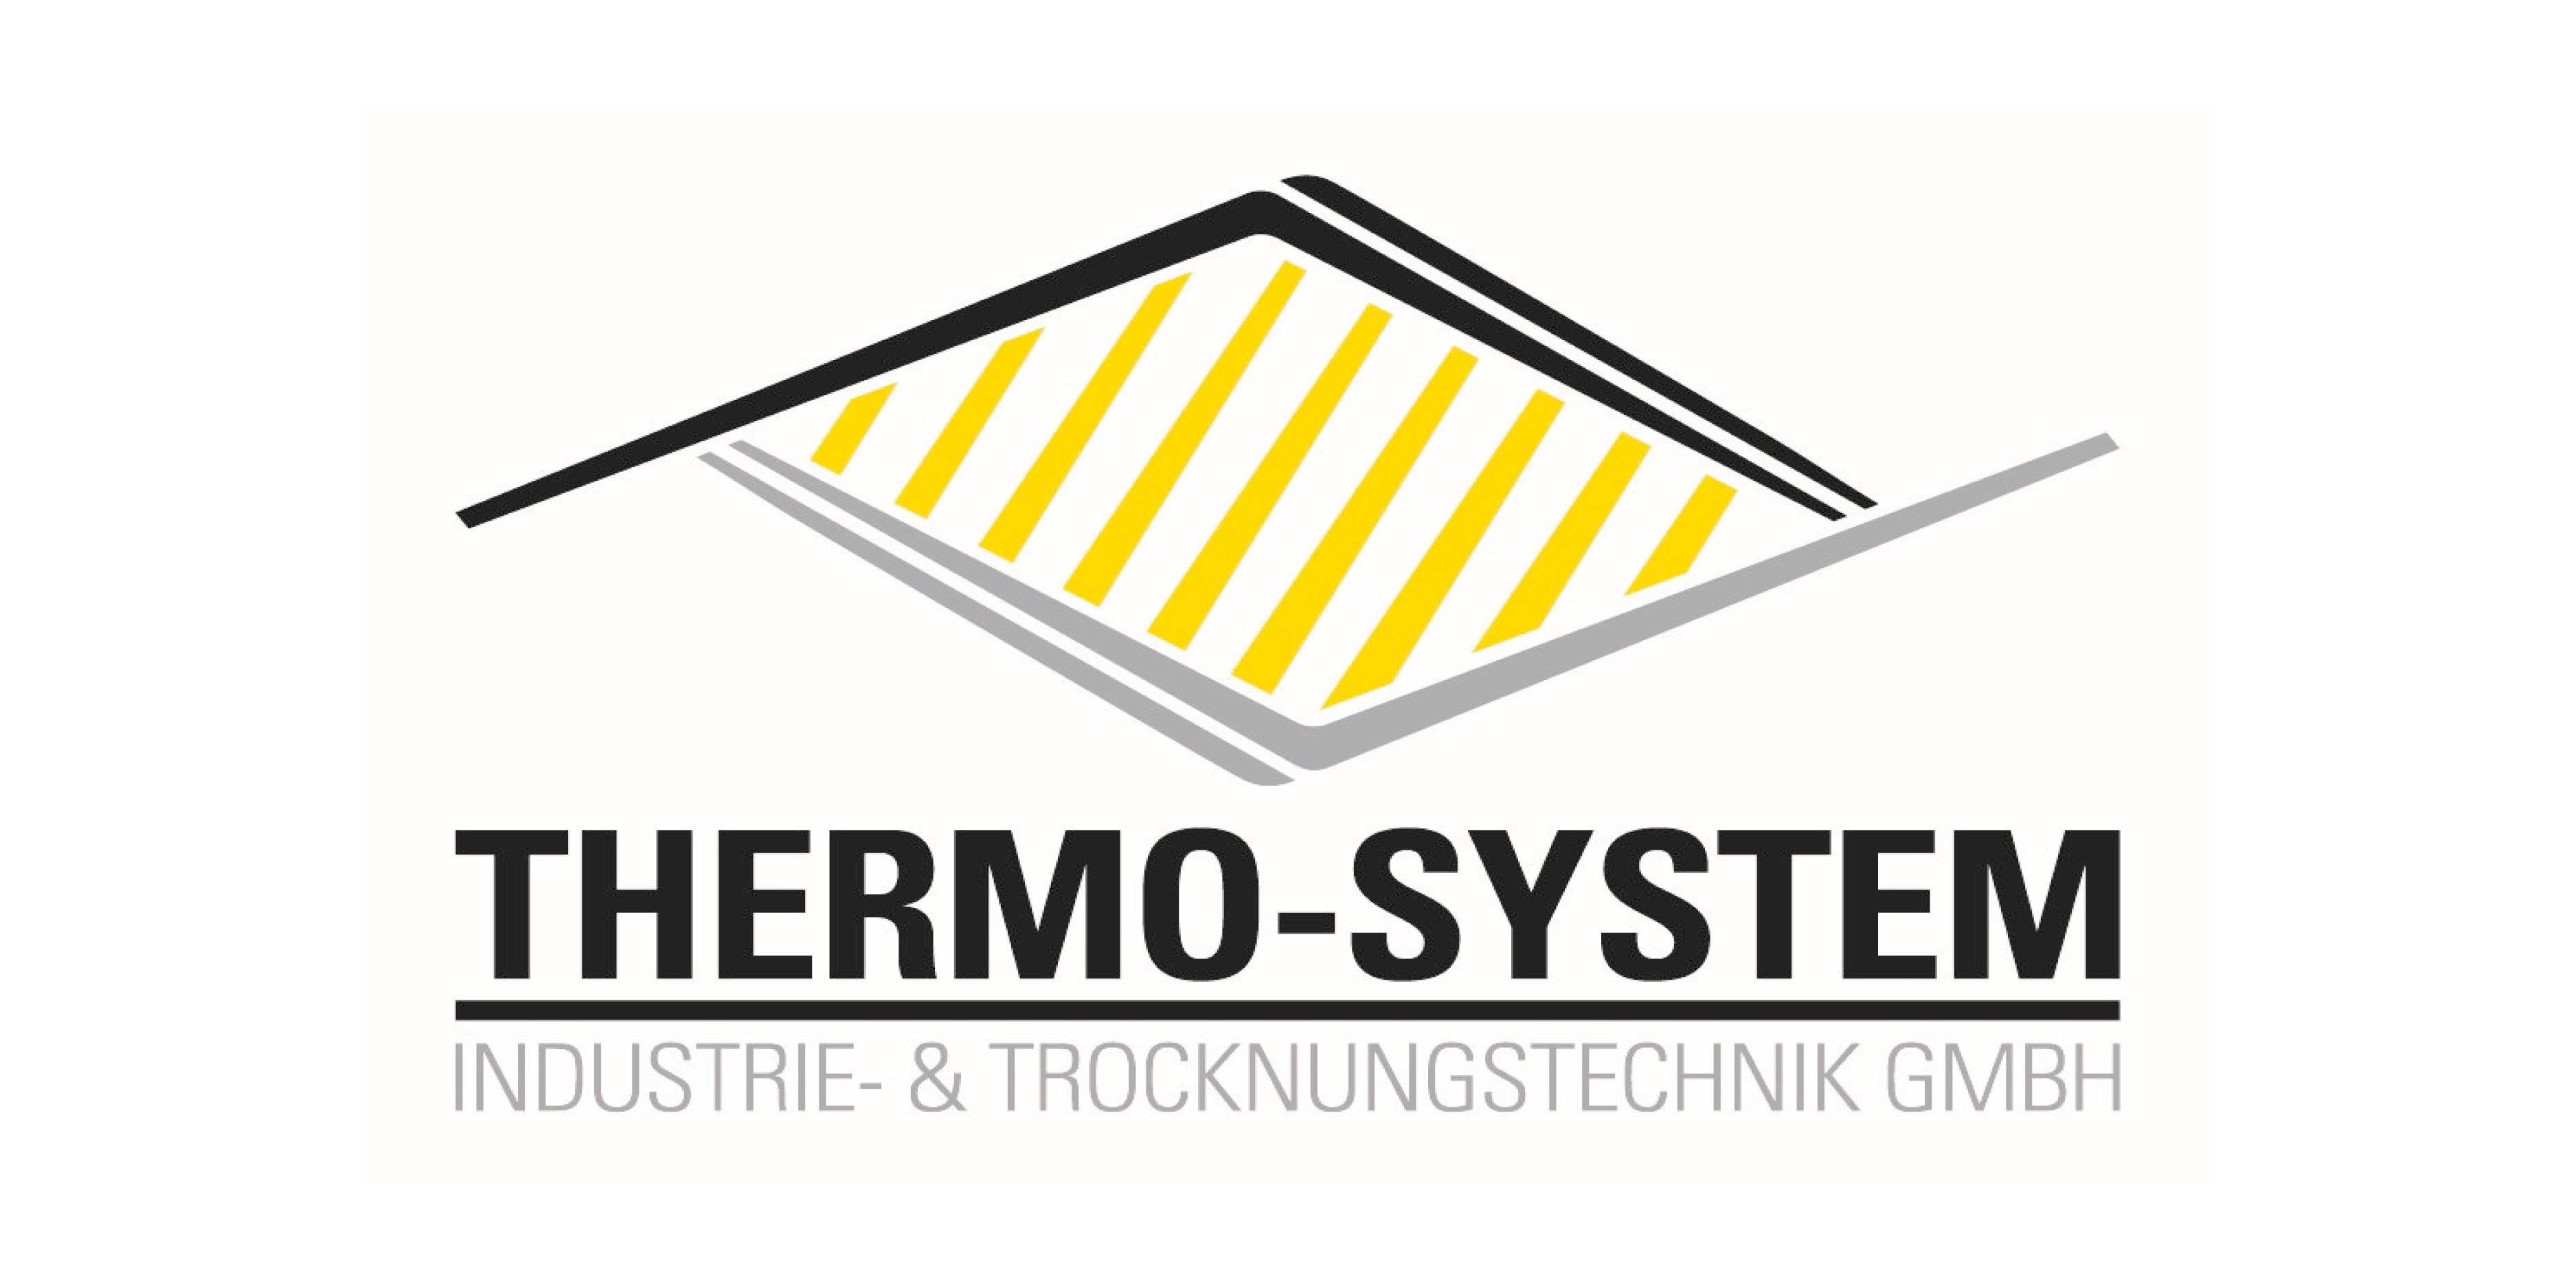 Thermo-System GmbH | srl